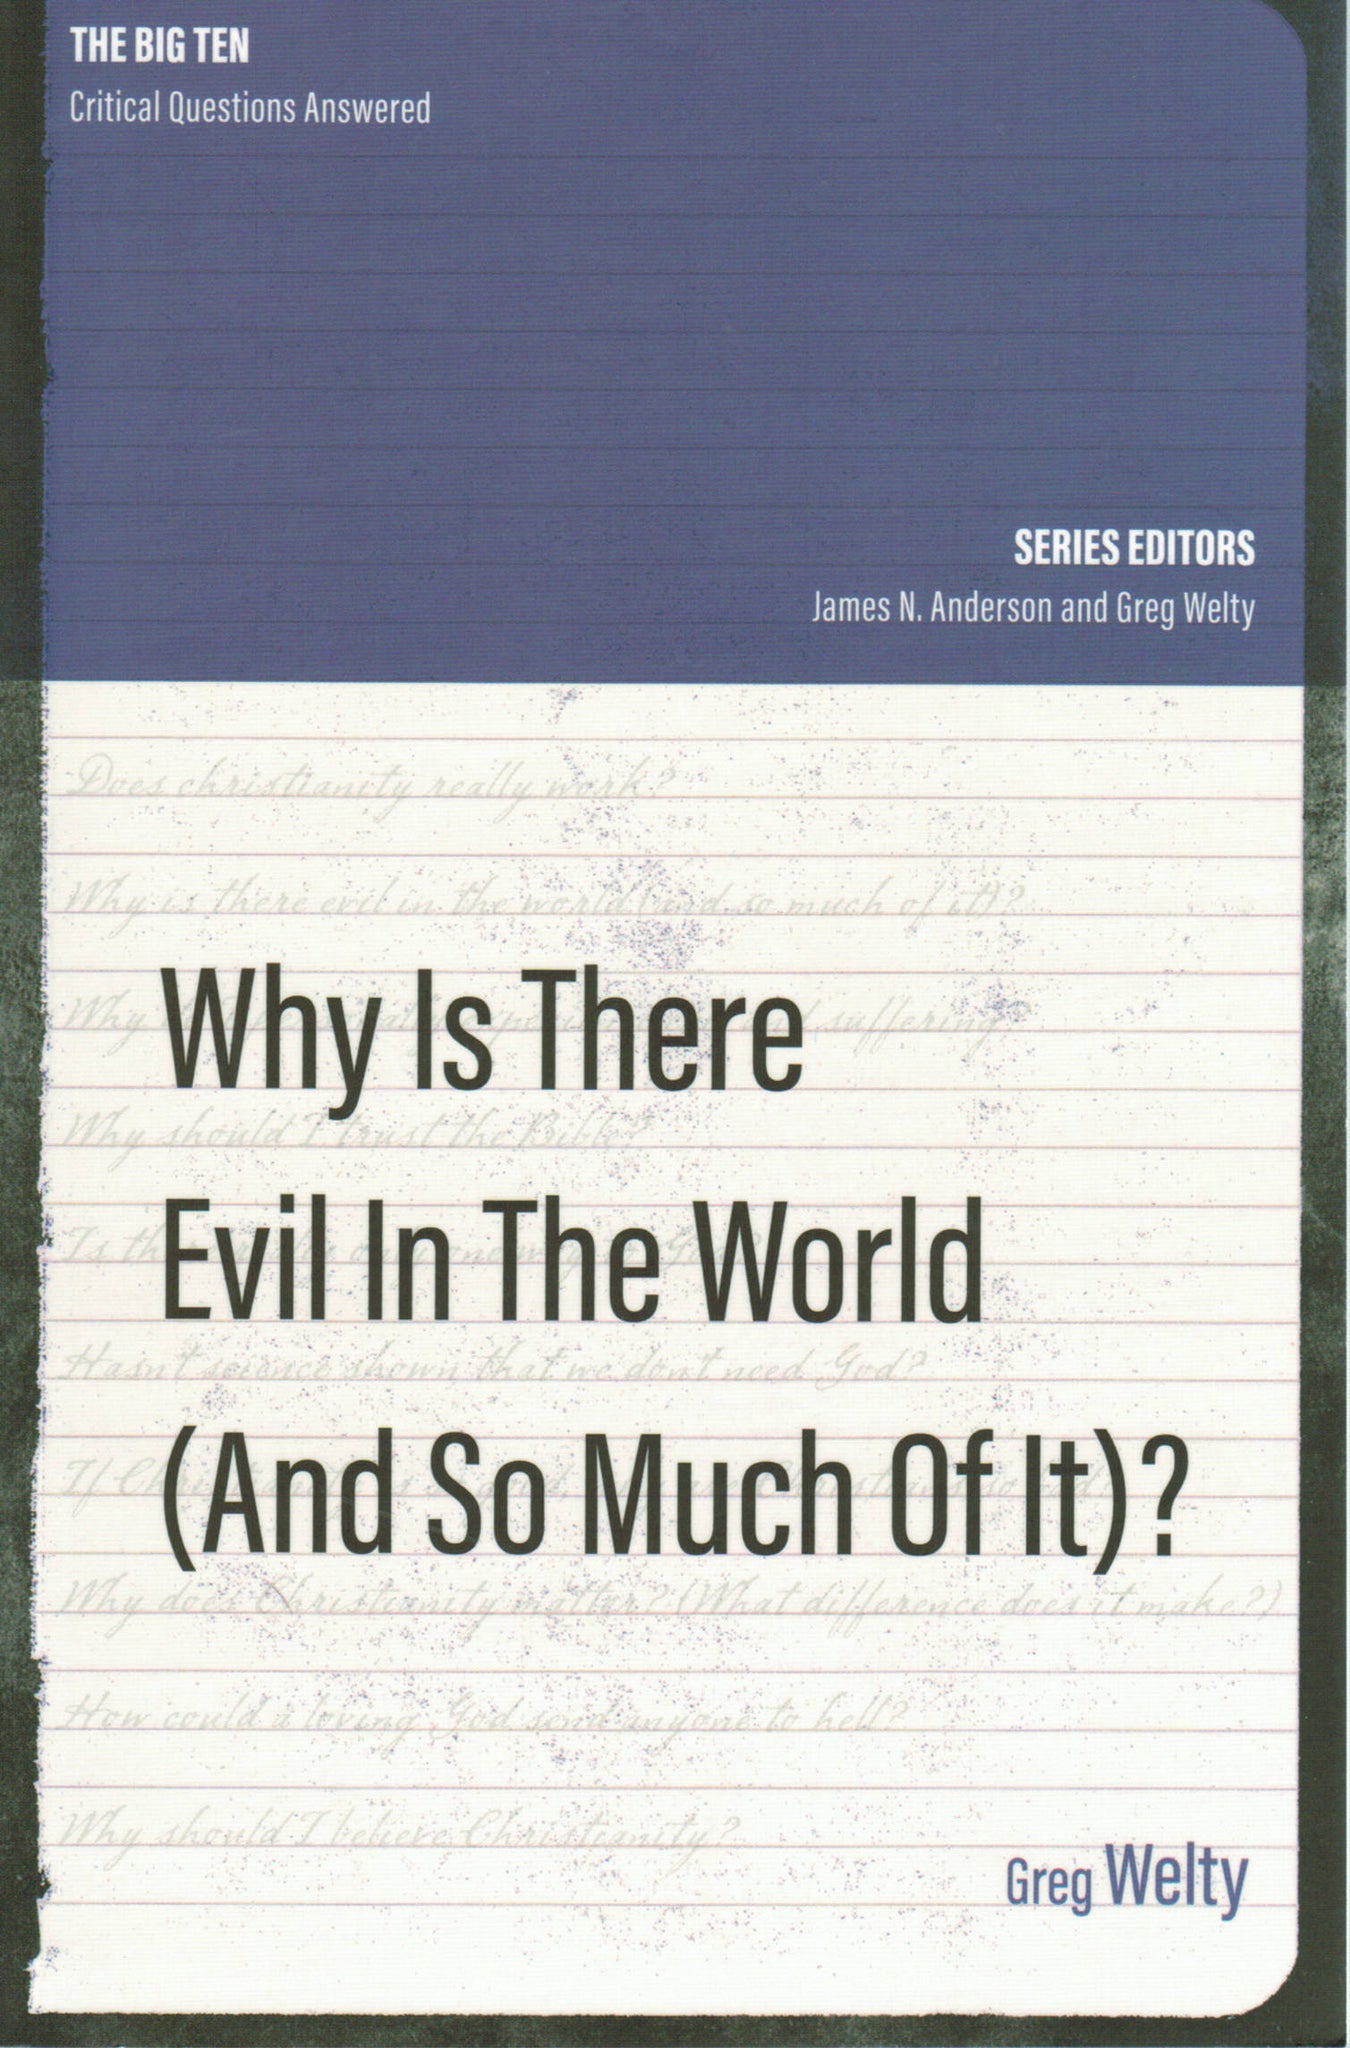 The Big Ten Critical Questions Answered - Why Is There Evil in the World (And So Much Of It)?